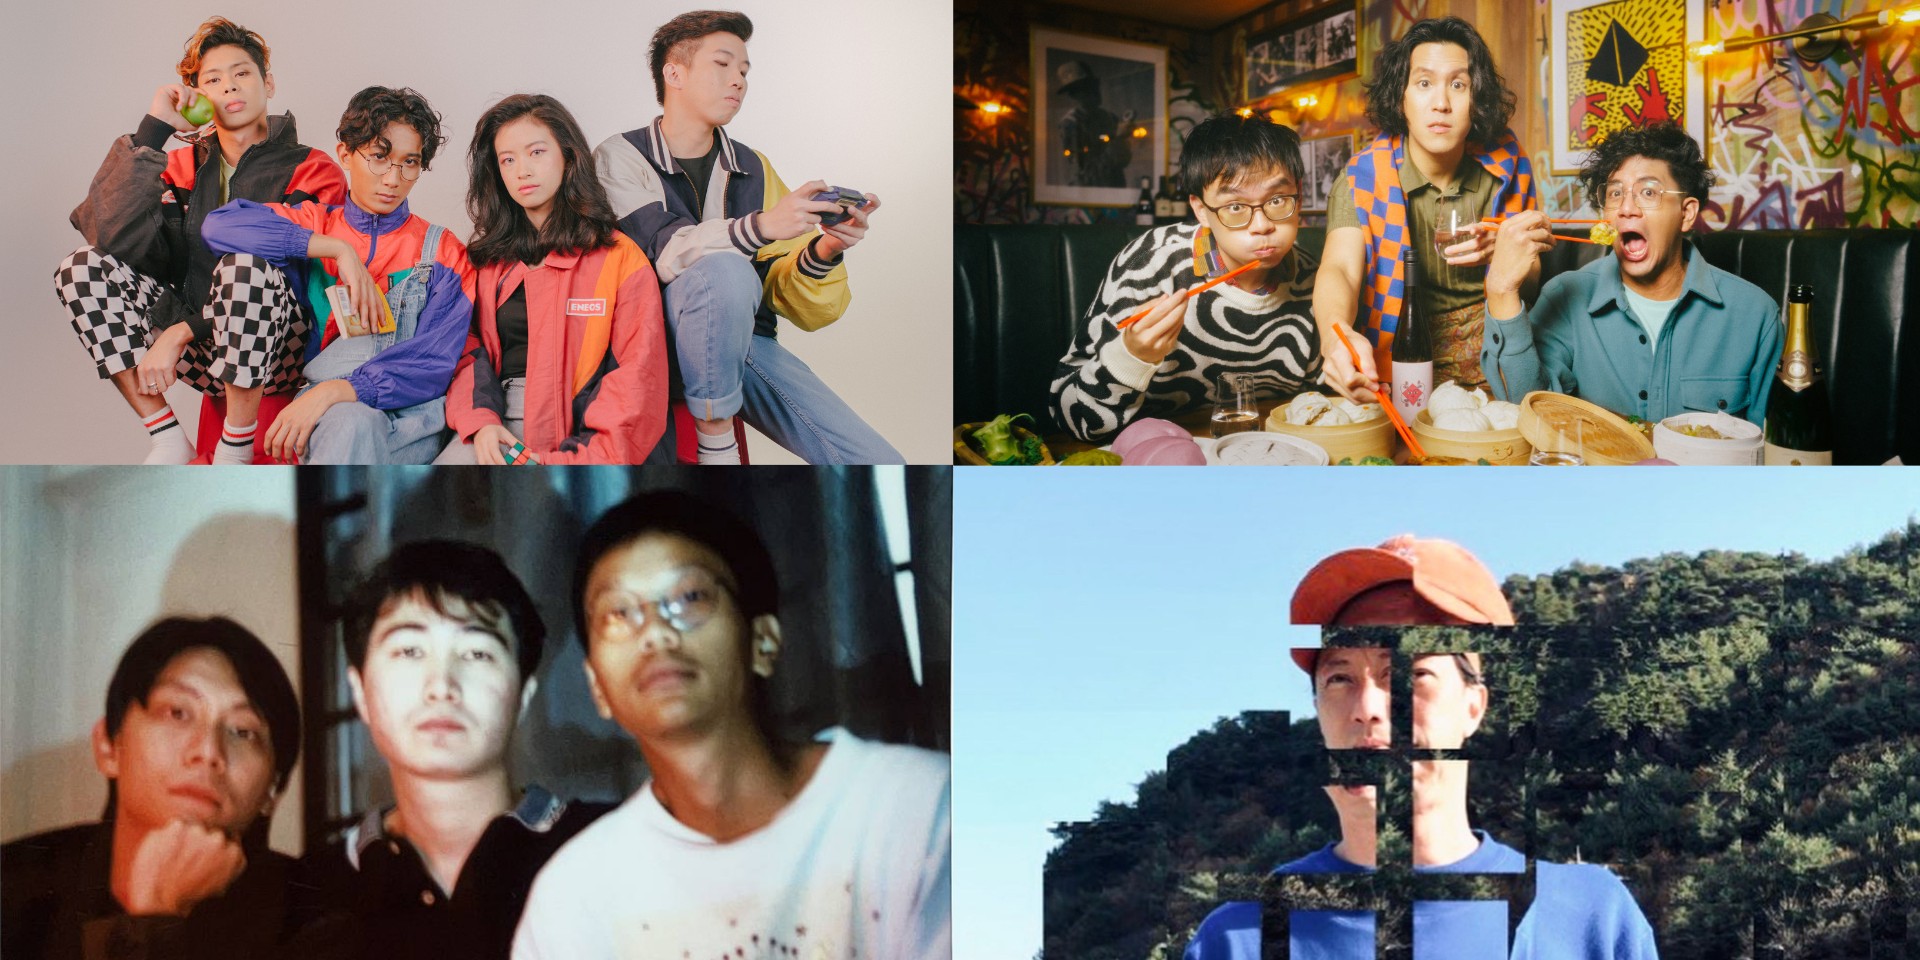 Fred Perry Night Tales: Haw Par Villa is happening this November with Disco Hue, Club Mild, CURB, and Kiat